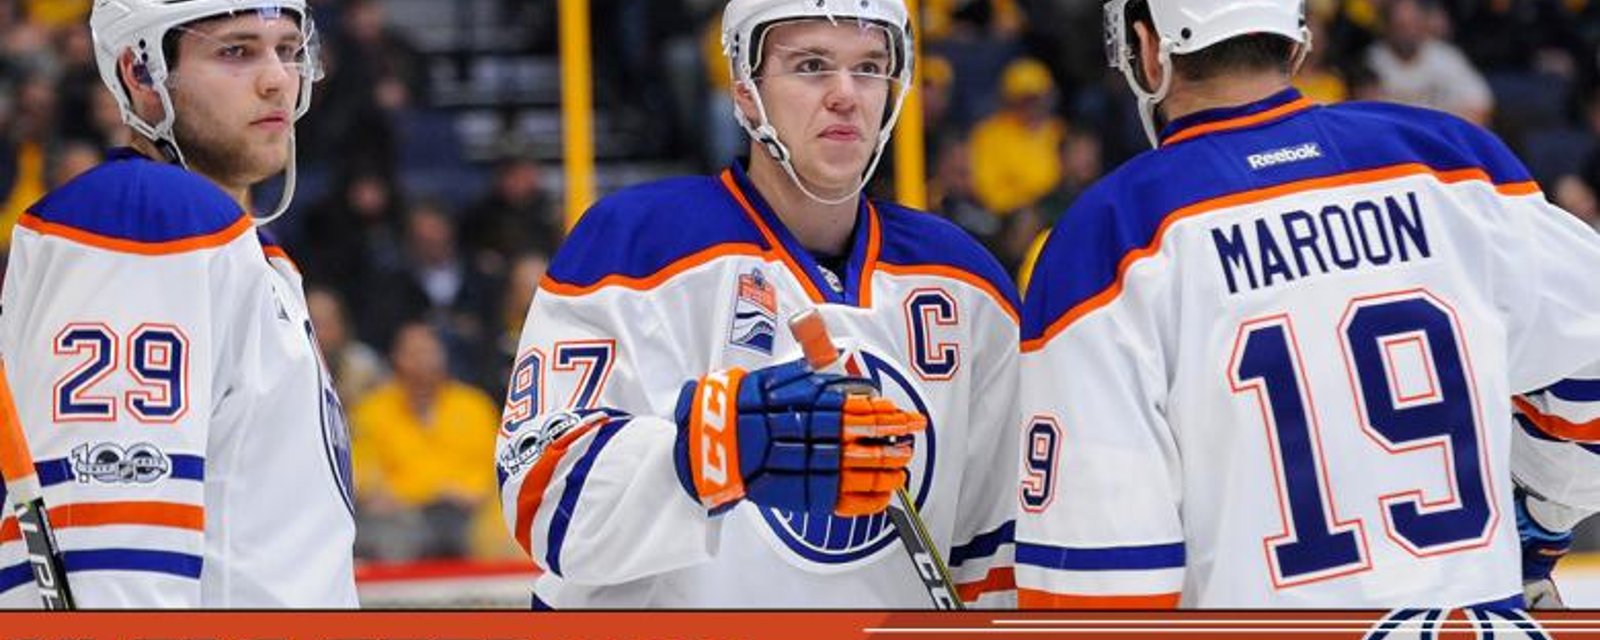 Are McDavid and Draisaitl becoming the best duo in the NHL?